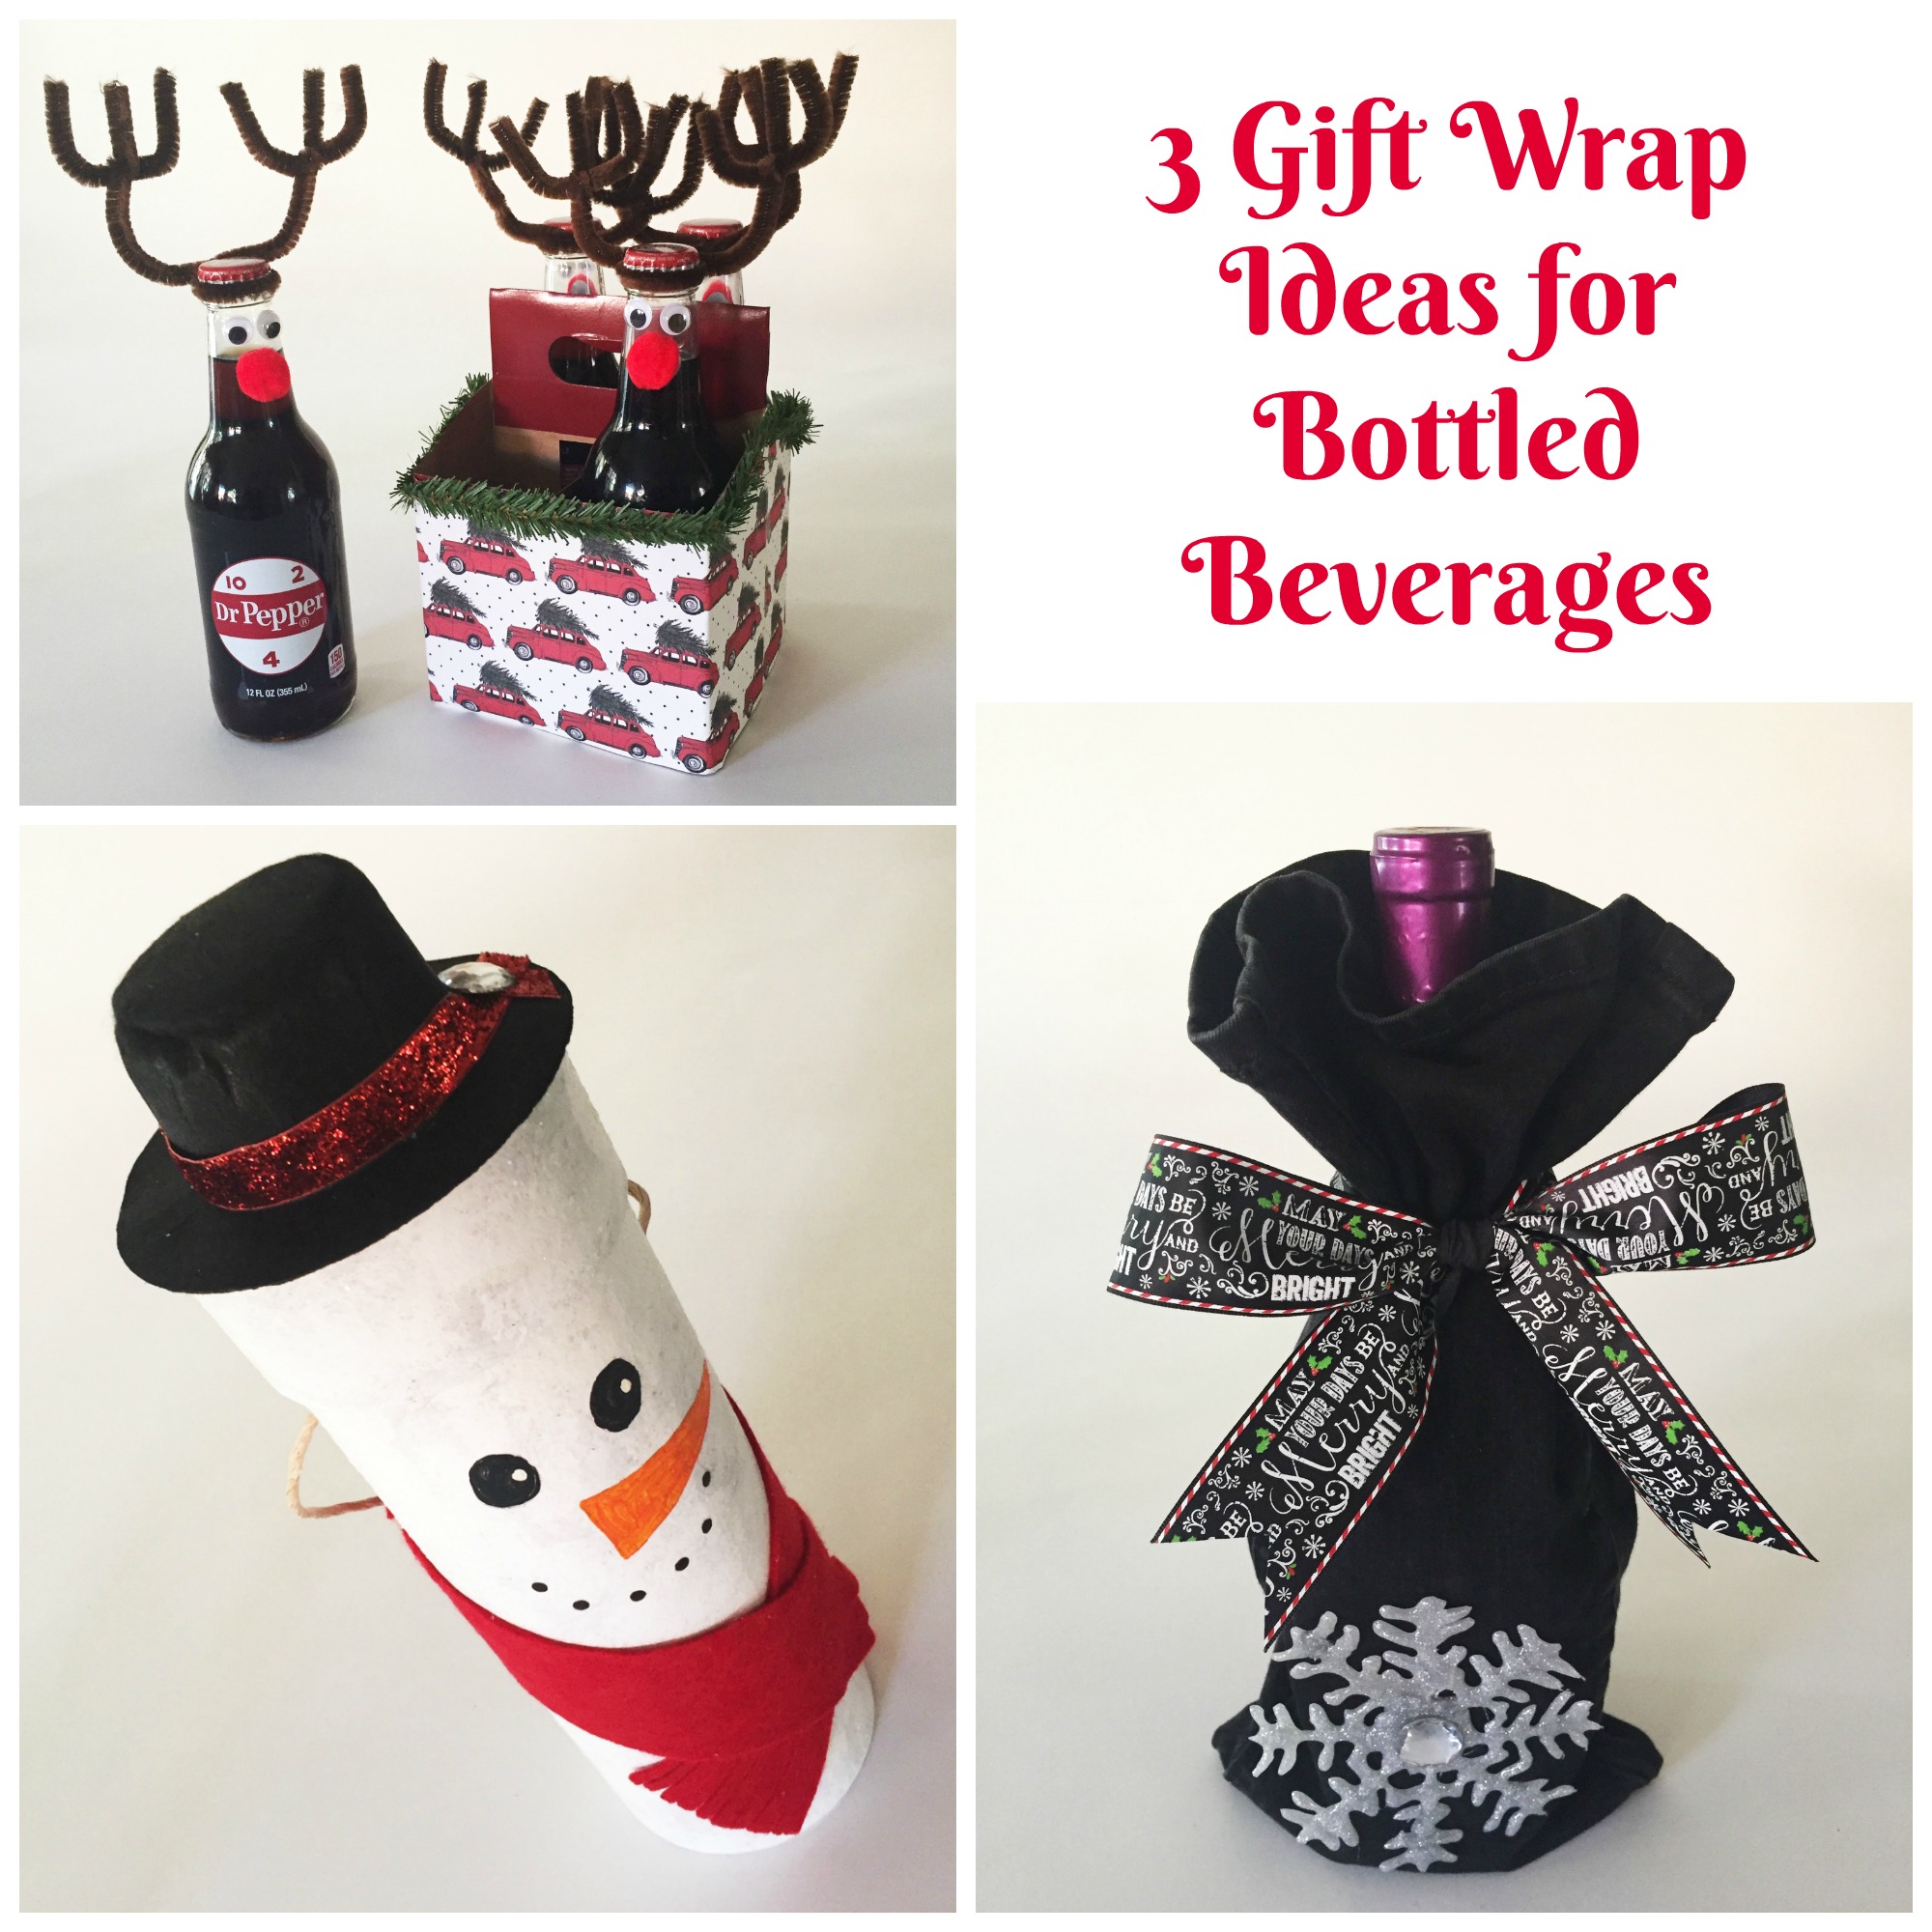 How to Wrap a Wine Bottle - 3 Easy Gift Wrapping Techniques